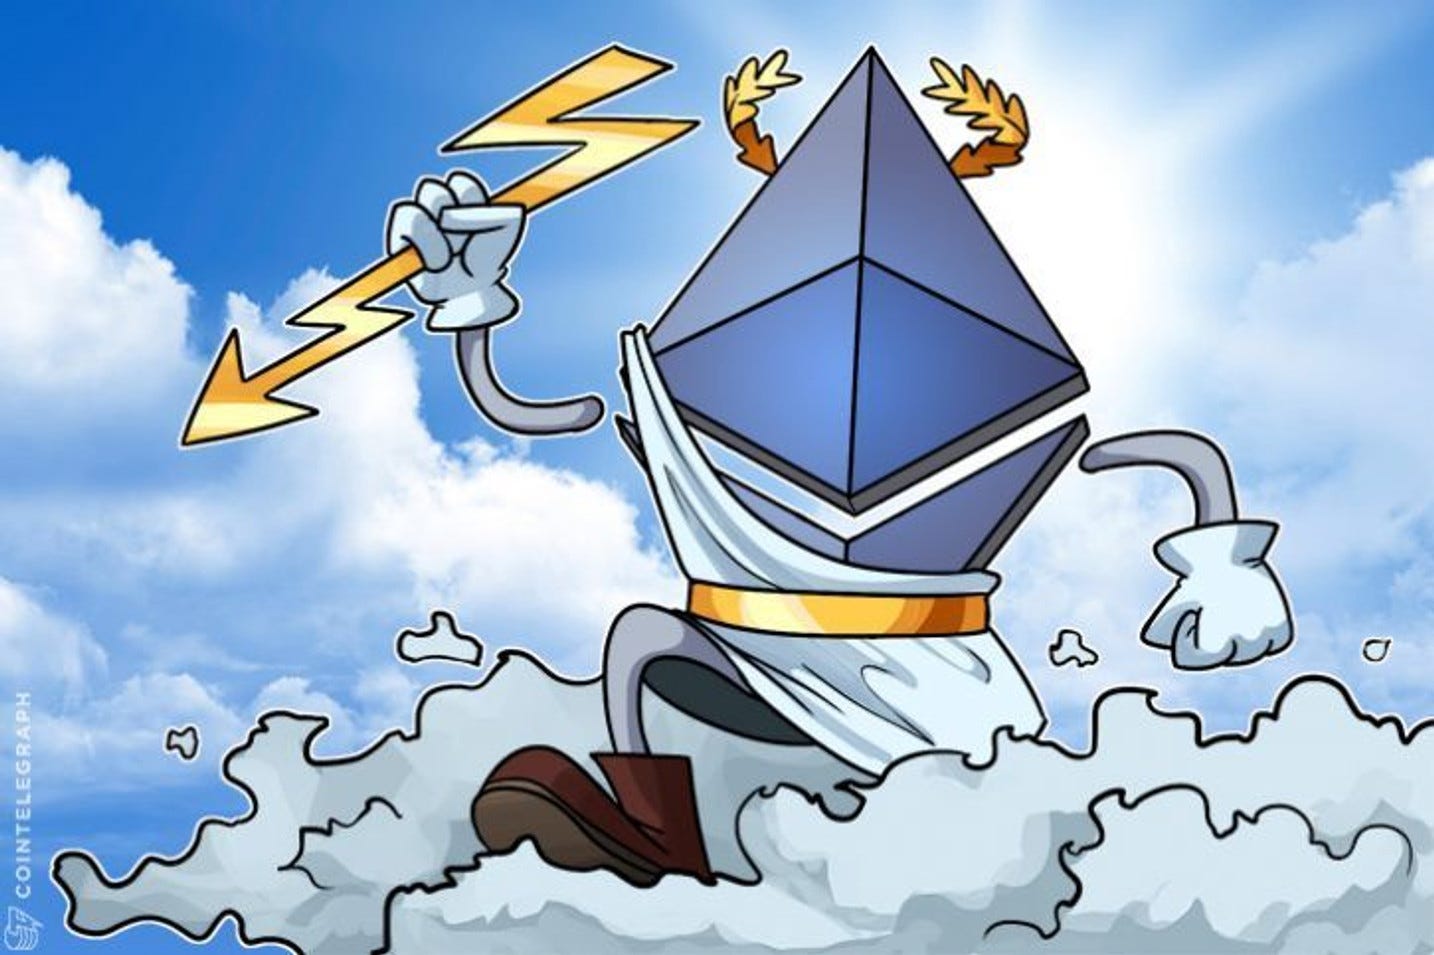 Ethereum Breaks $500 For First Time In Cross-Crypto Frenzy